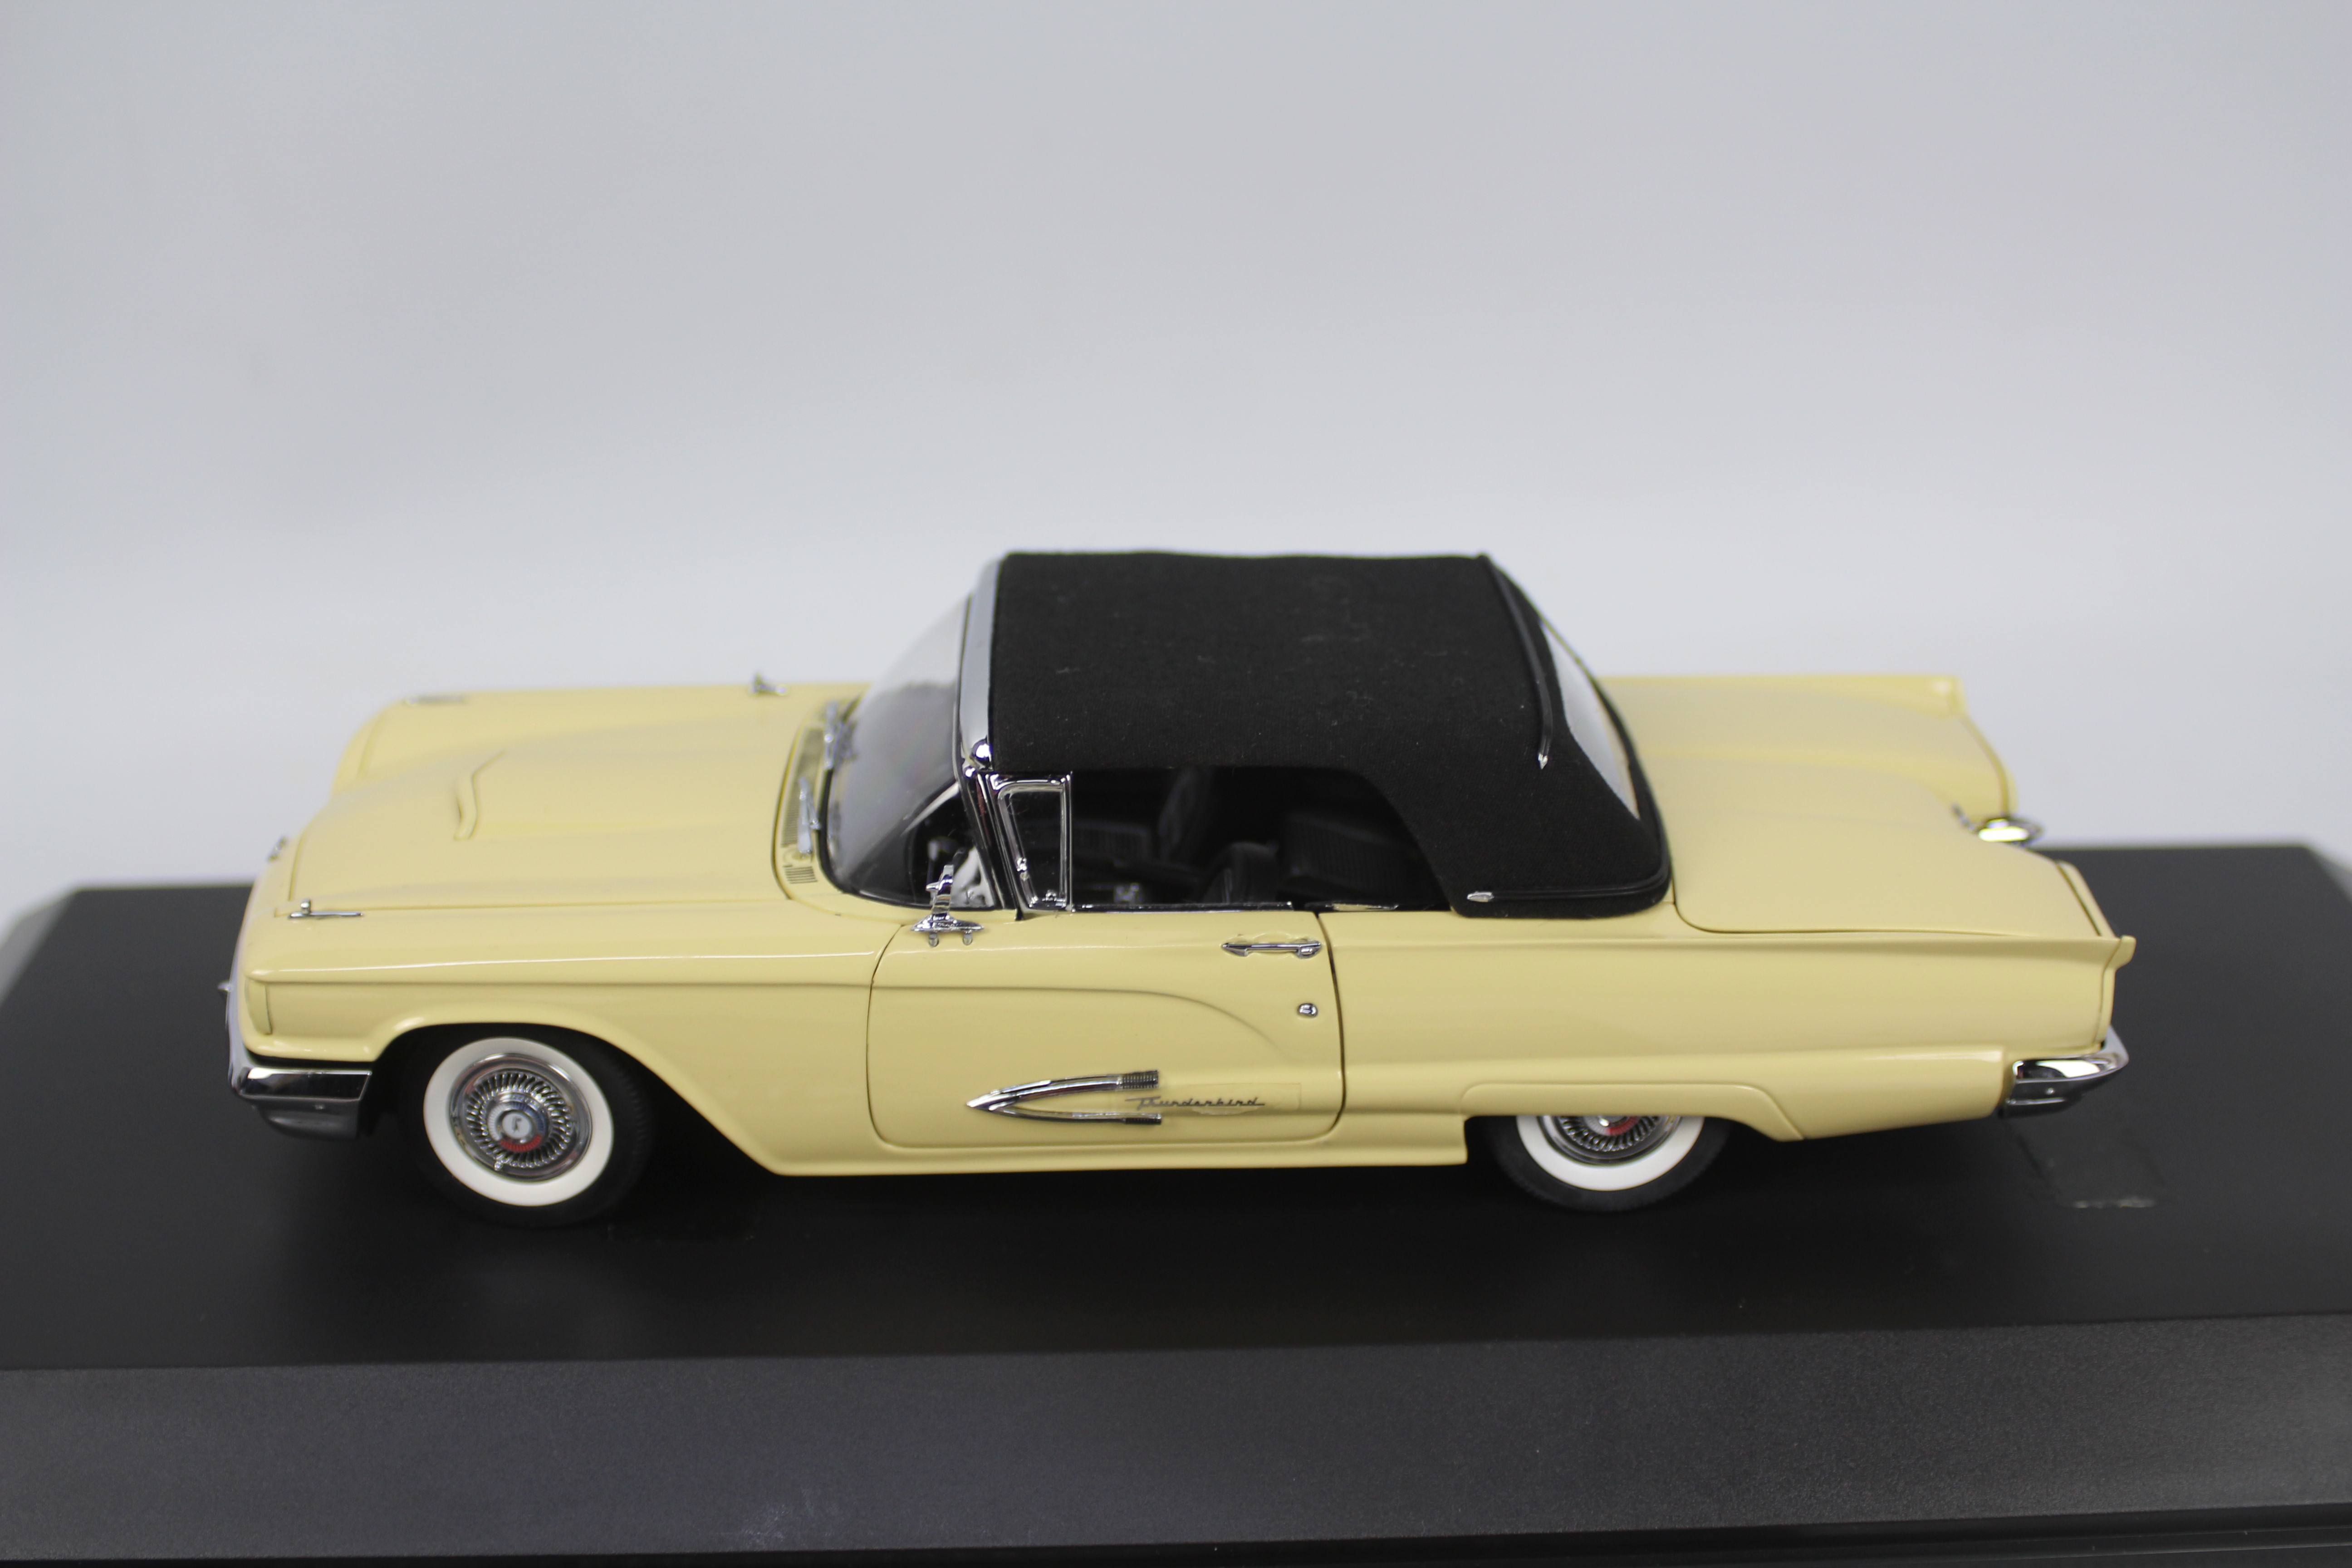 Danbury Mint - 2 x Ford Thunderbird models in 1:24 scale, - Image 3 of 5